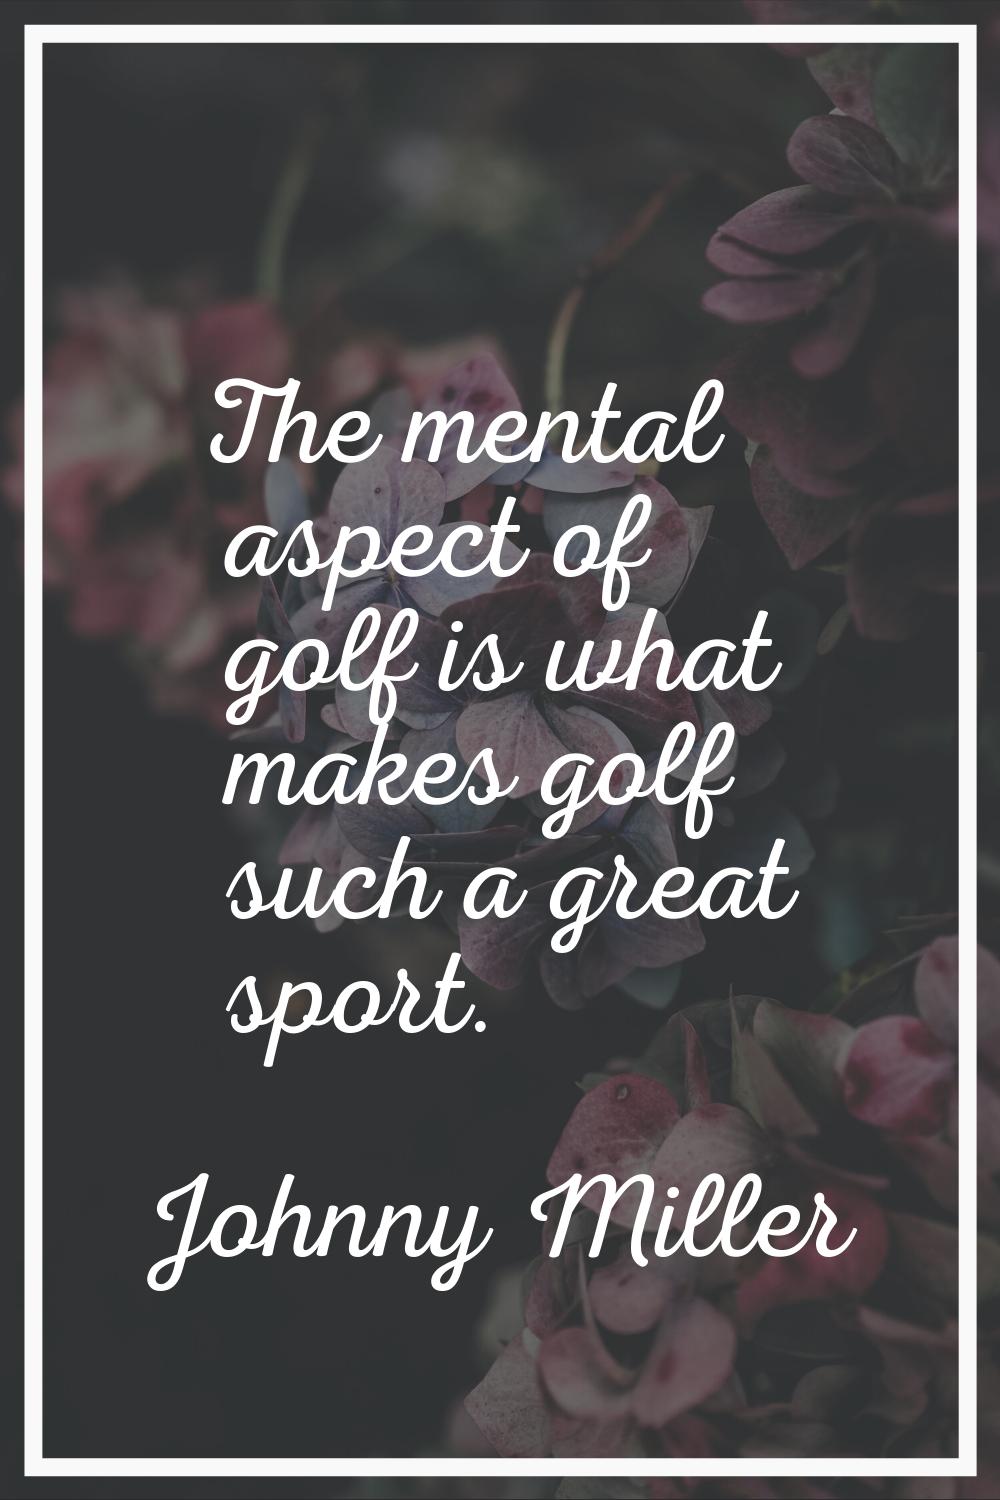 The mental aspect of golf is what makes golf such a great sport.